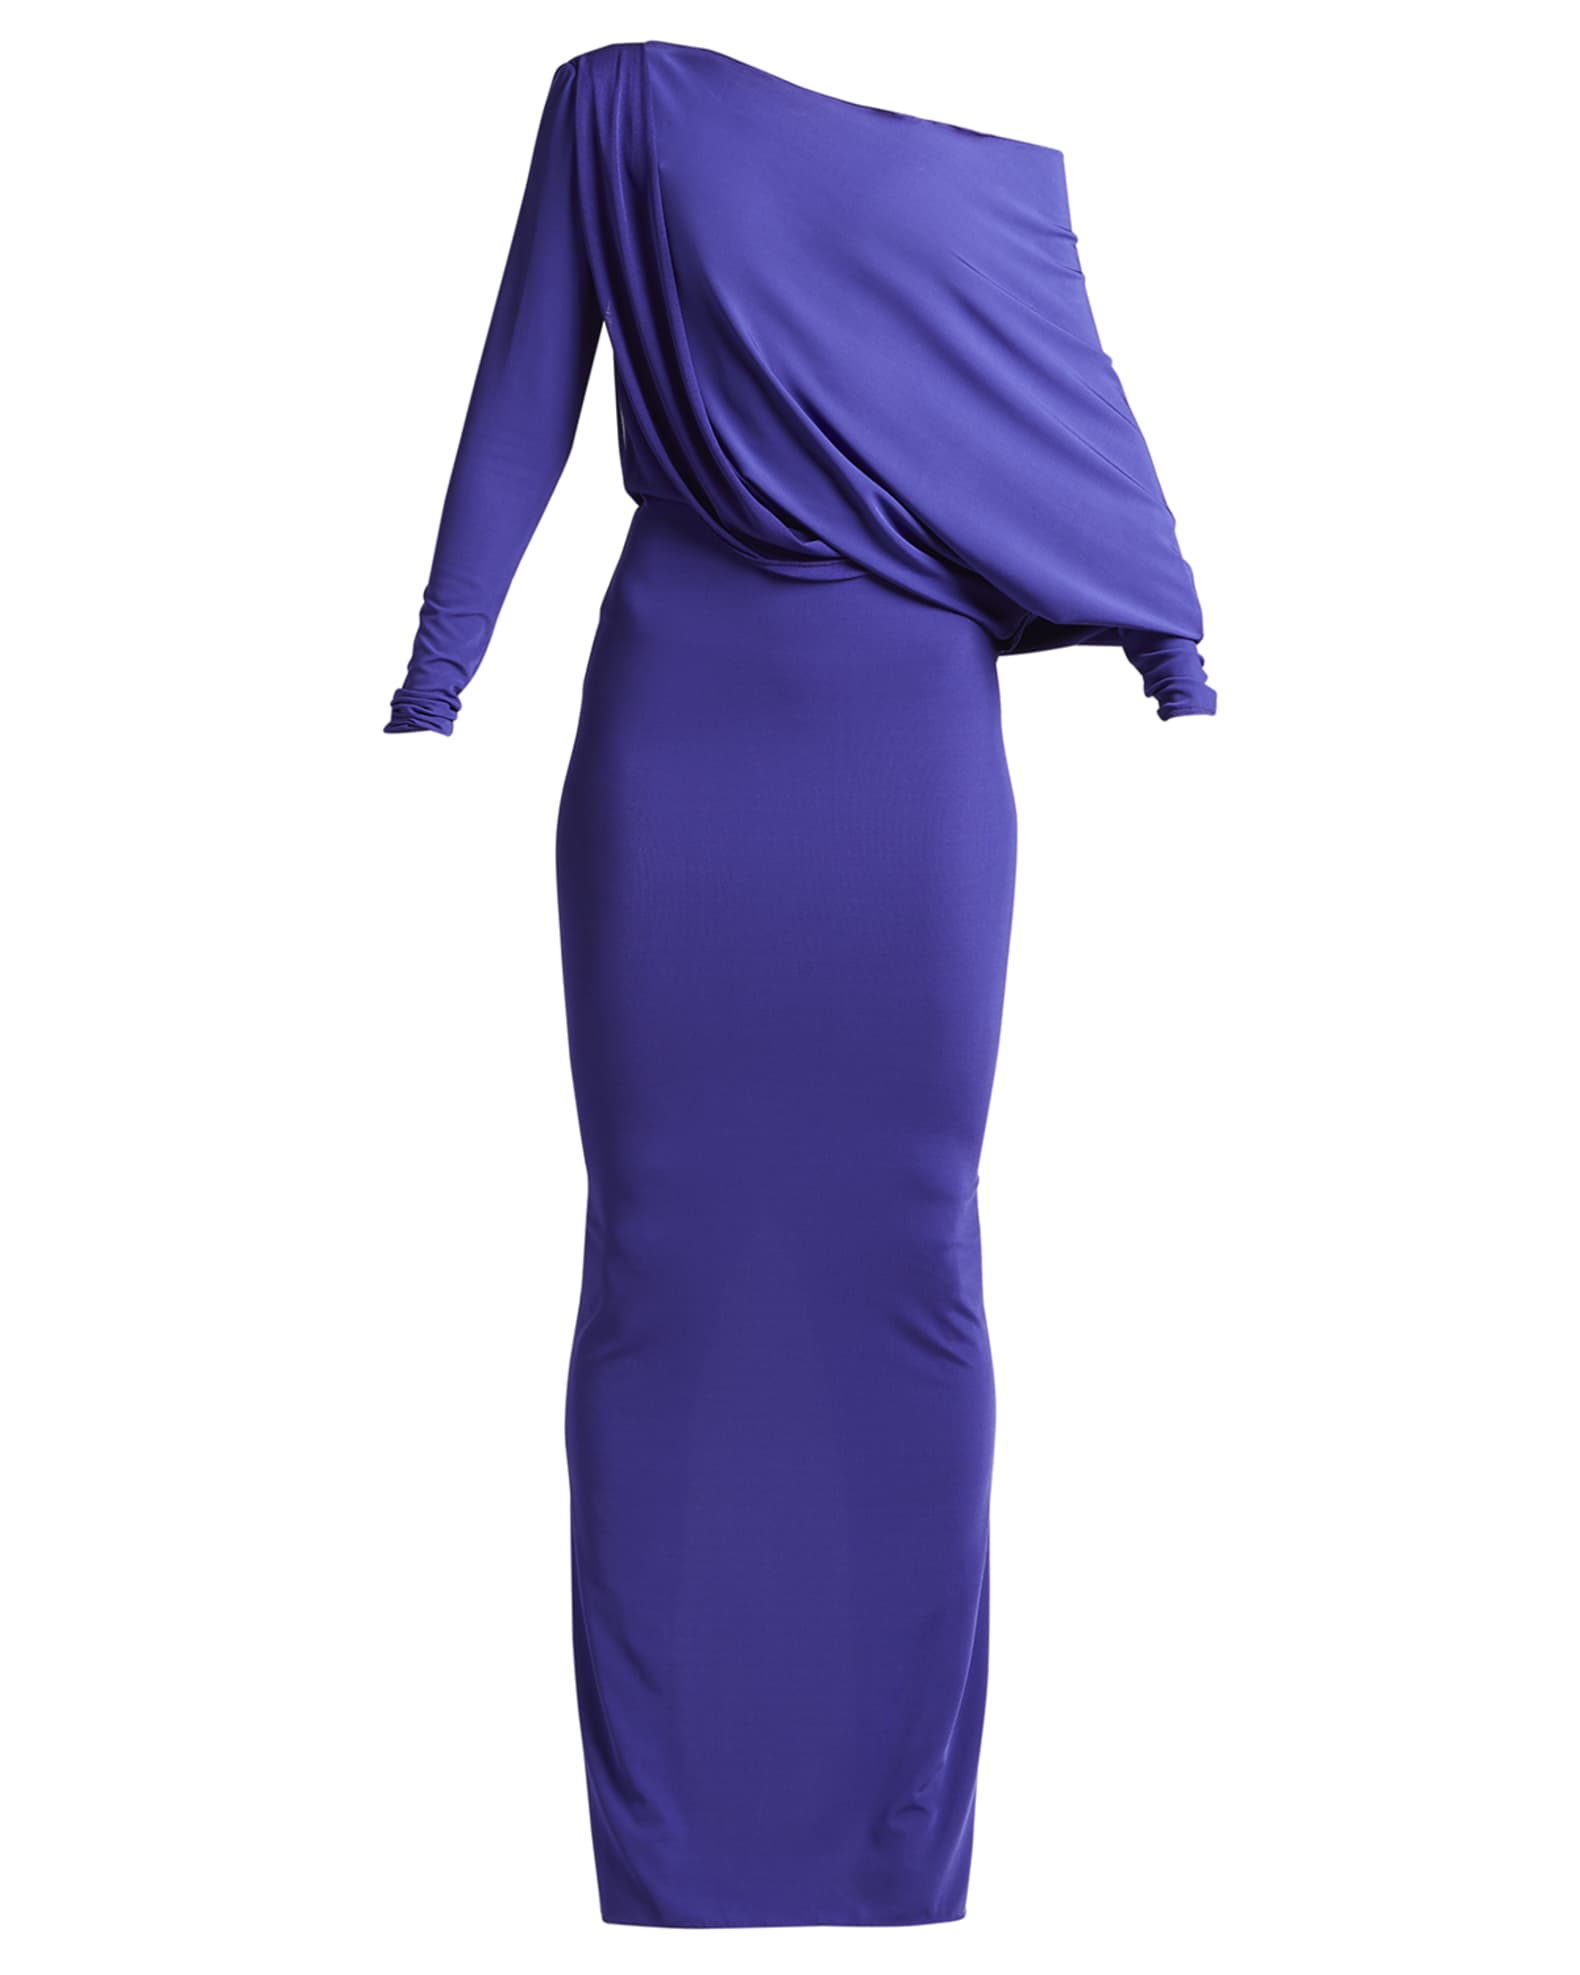 TOM FORD Draped One-Shoulder Jersey Gown | Neiman Marcus